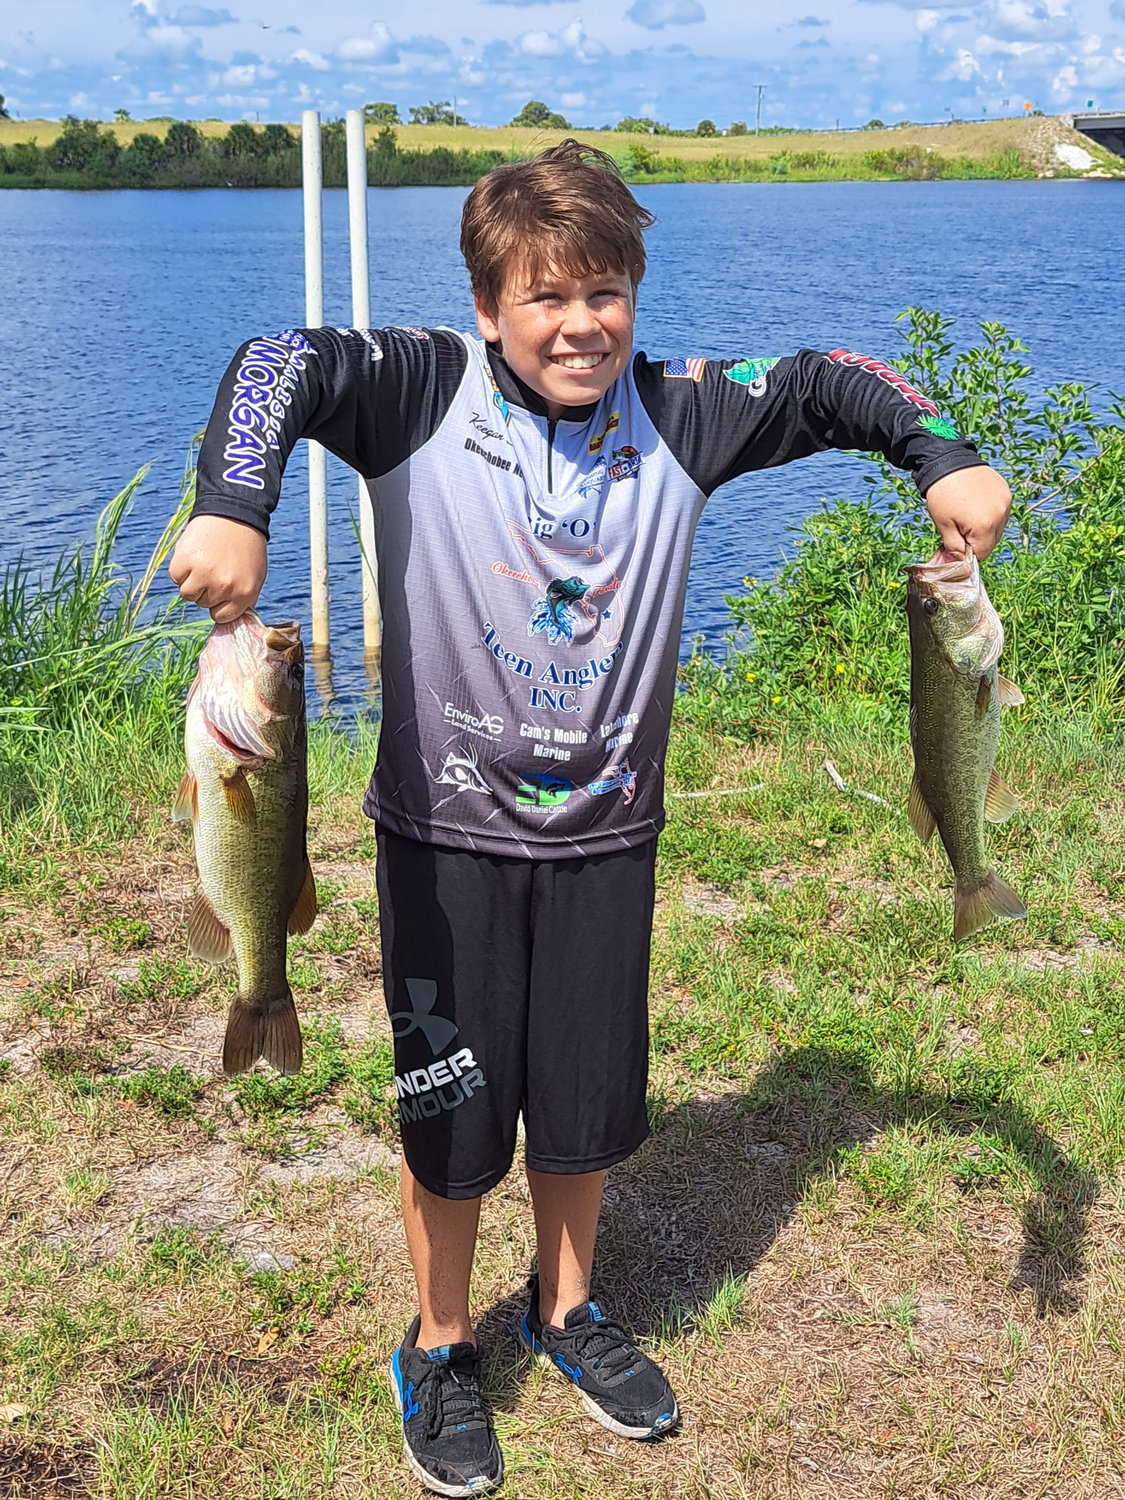 Keegan Siefker placed second in the 9-13 Age Group with 5.75 pounds.